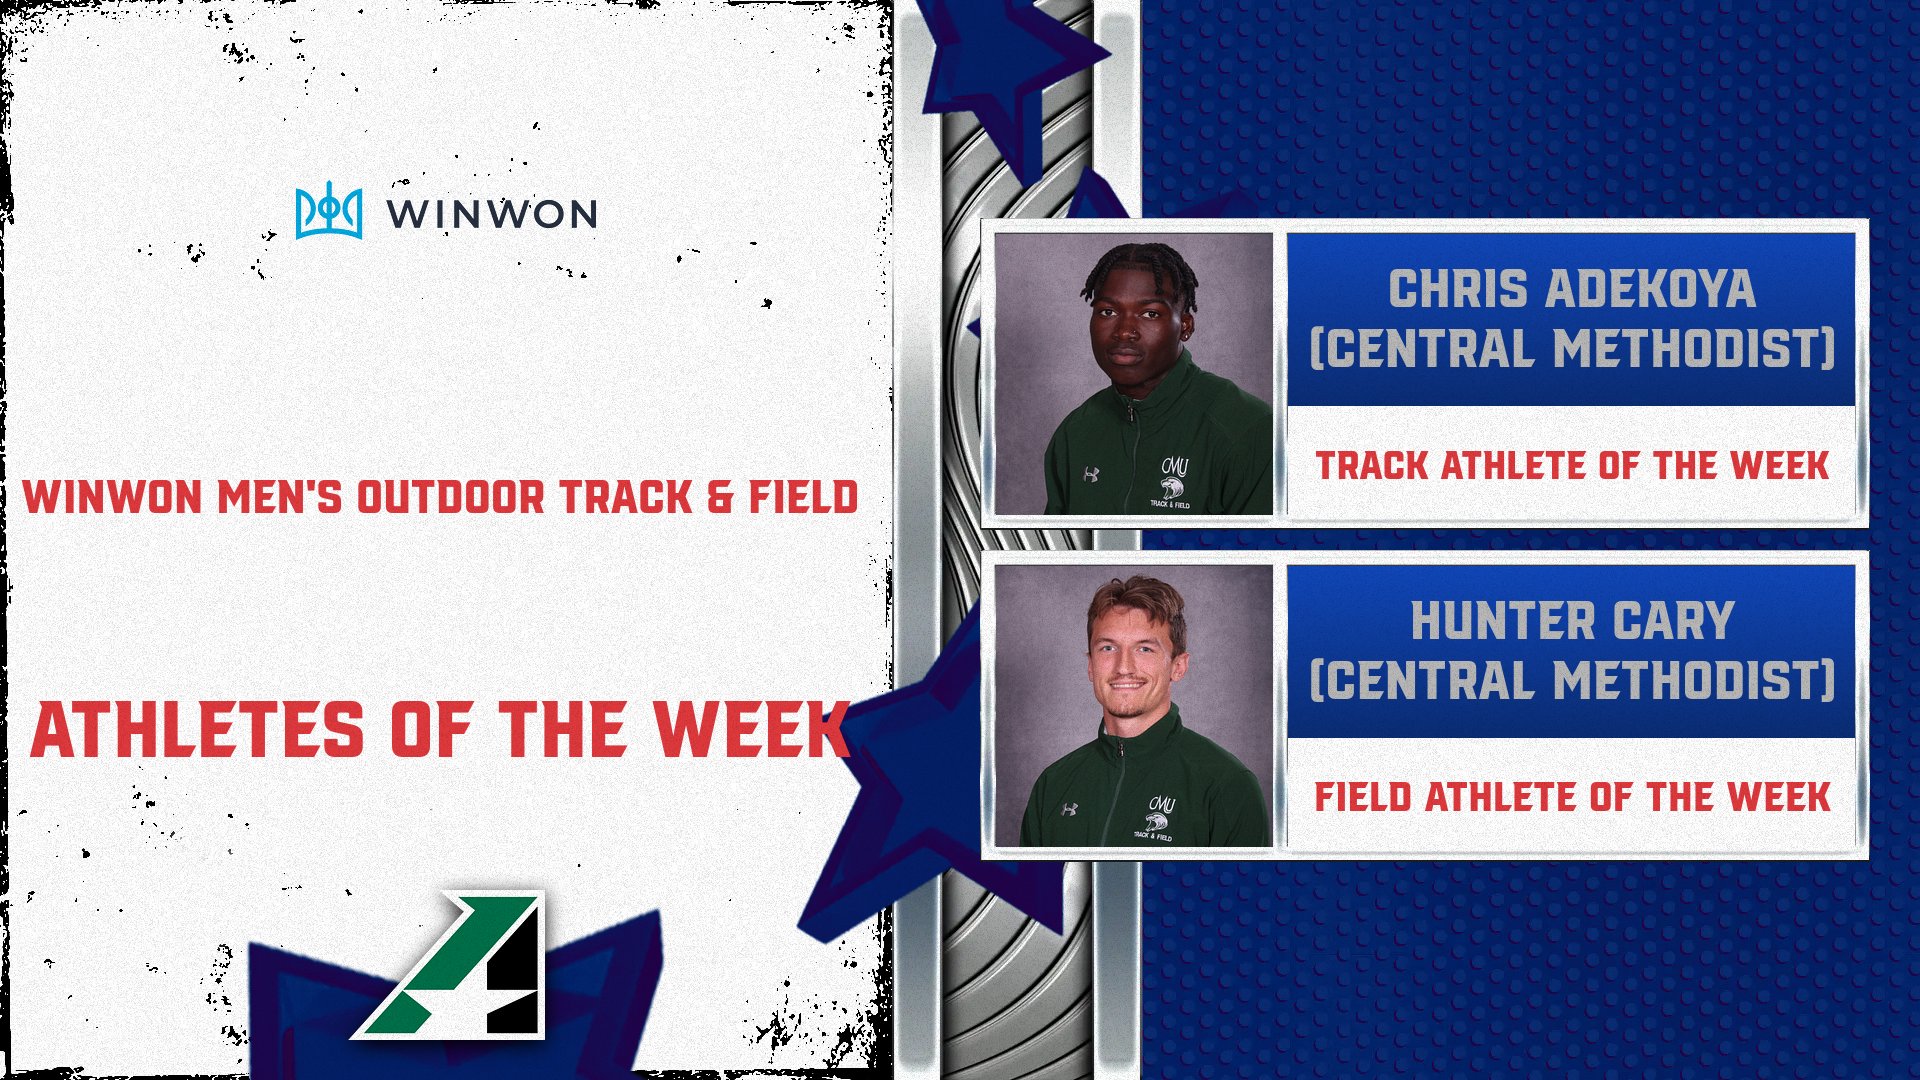 CMU Sweeps WinWon Men’s Outdoor Track & Field Athletes of the Week